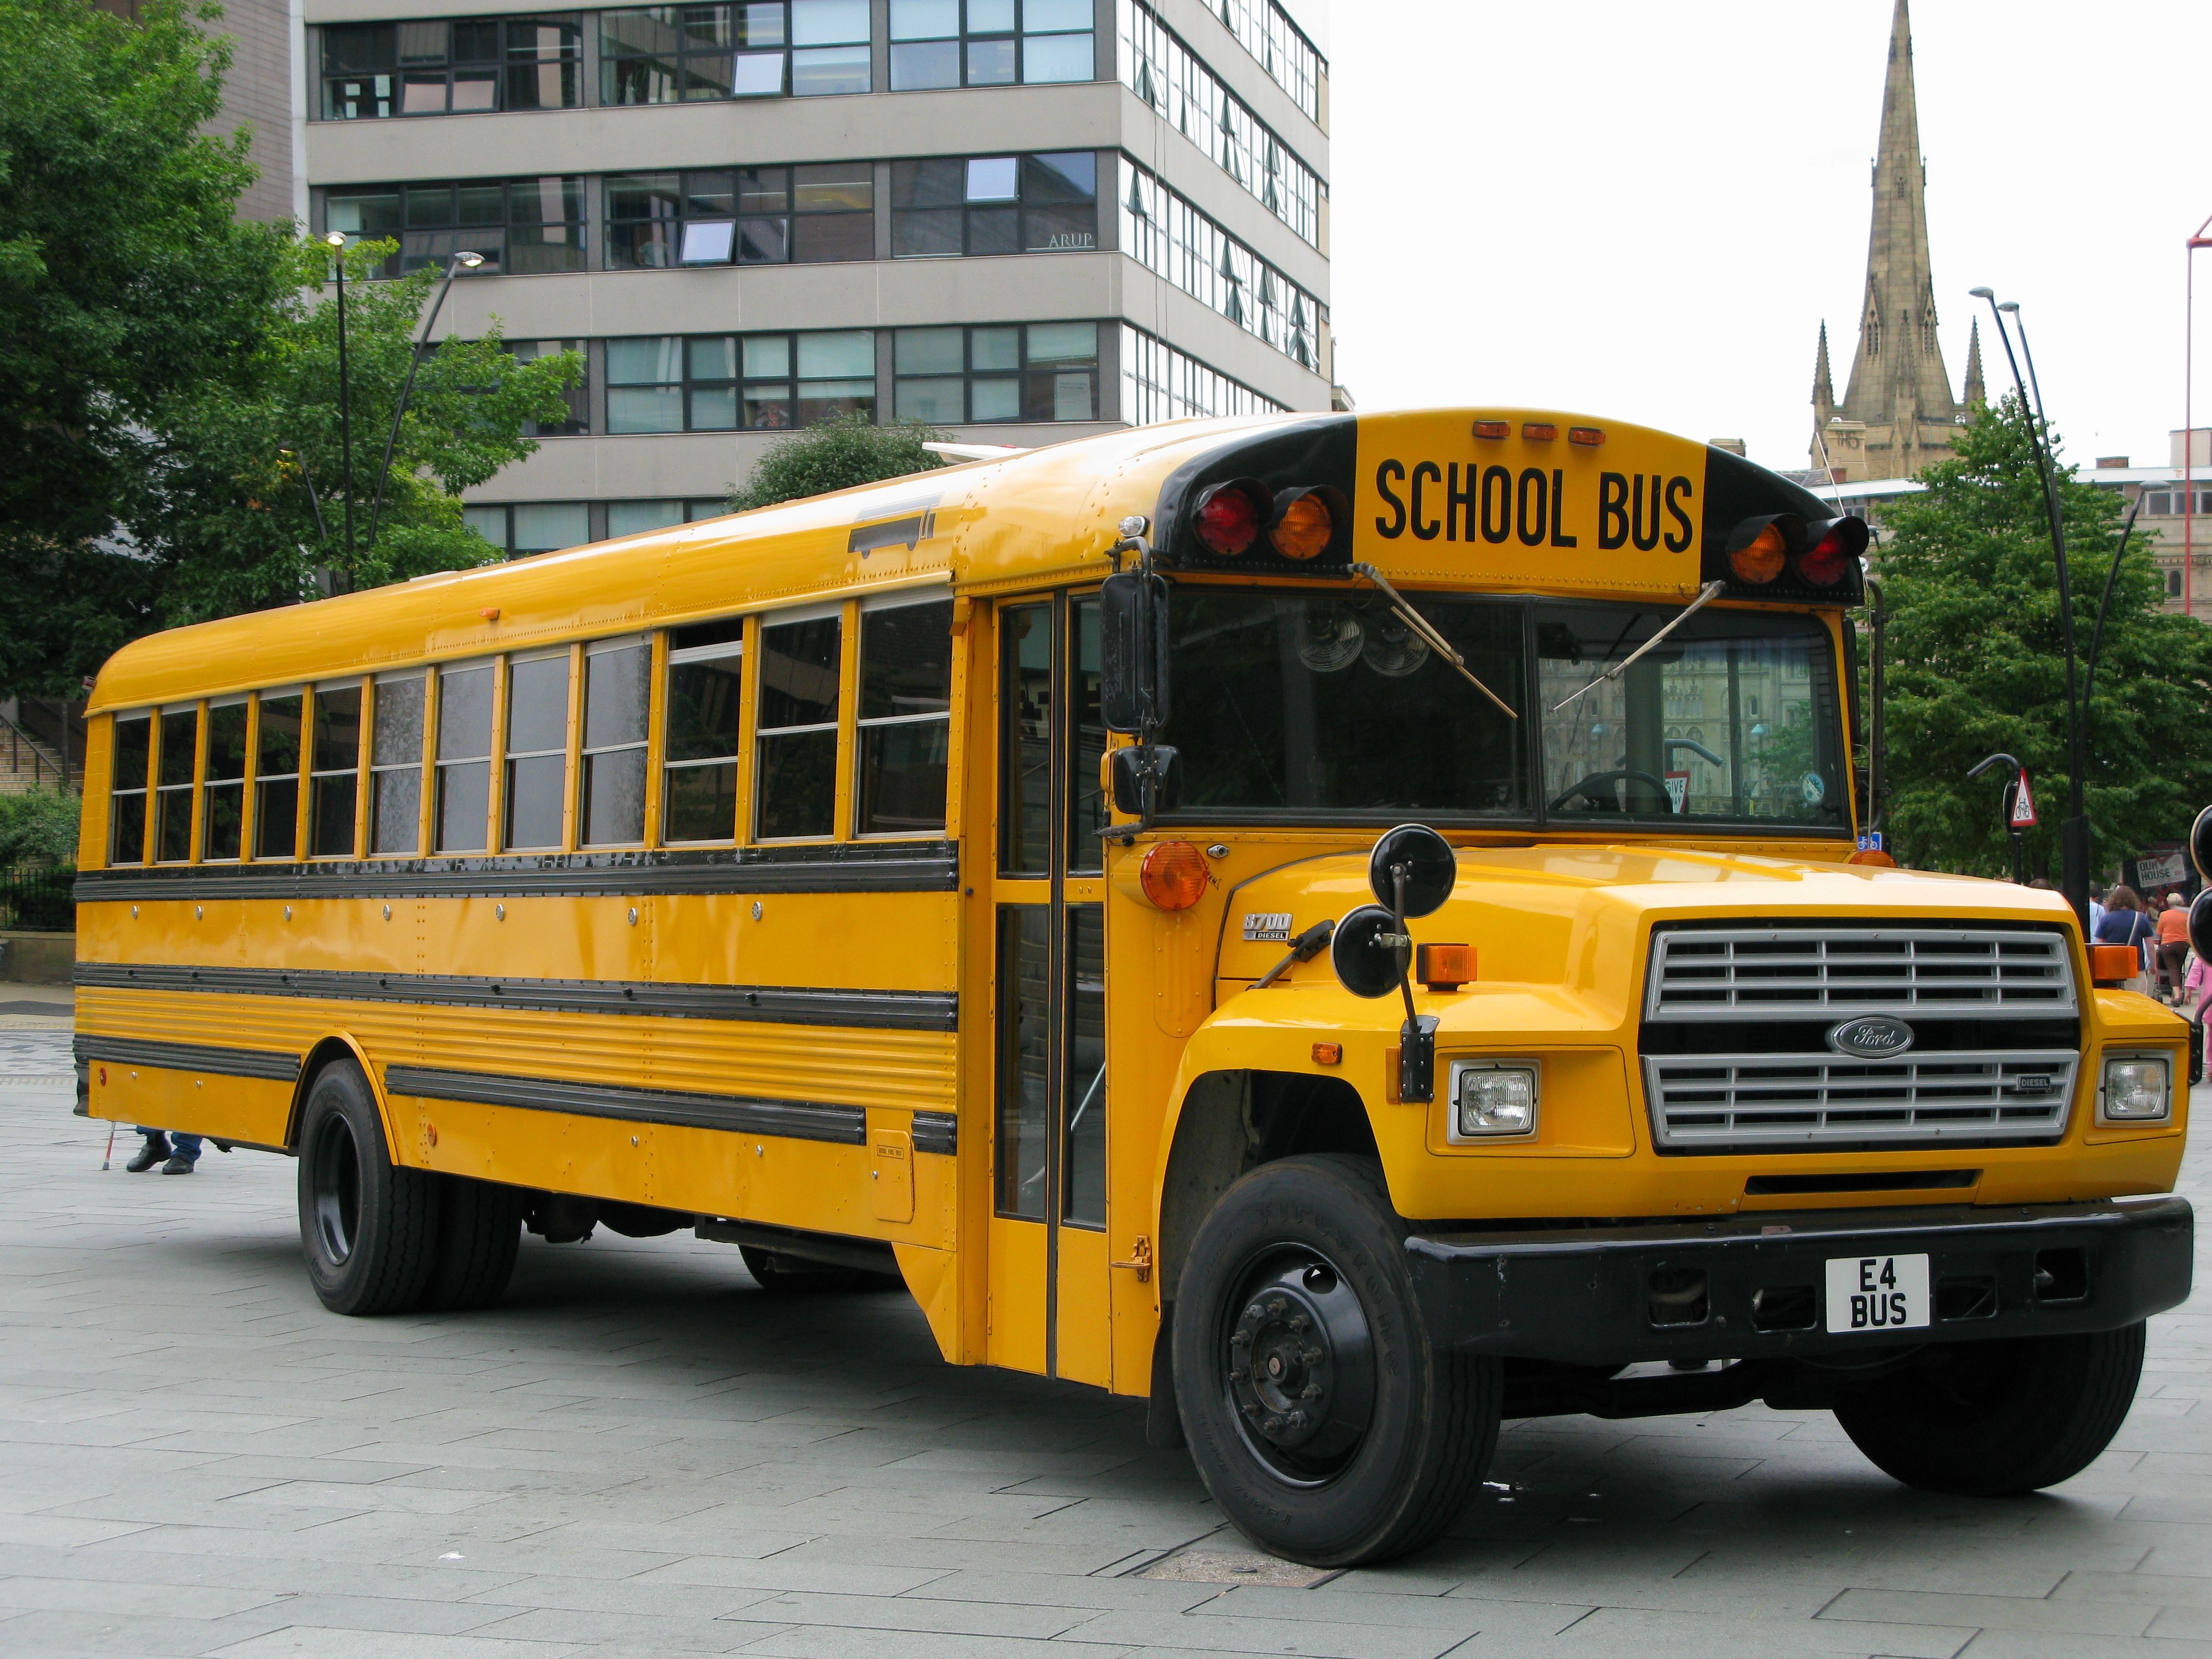 Ford School Bus 4k Ultra HD Wallpapers and Backgrounds Image